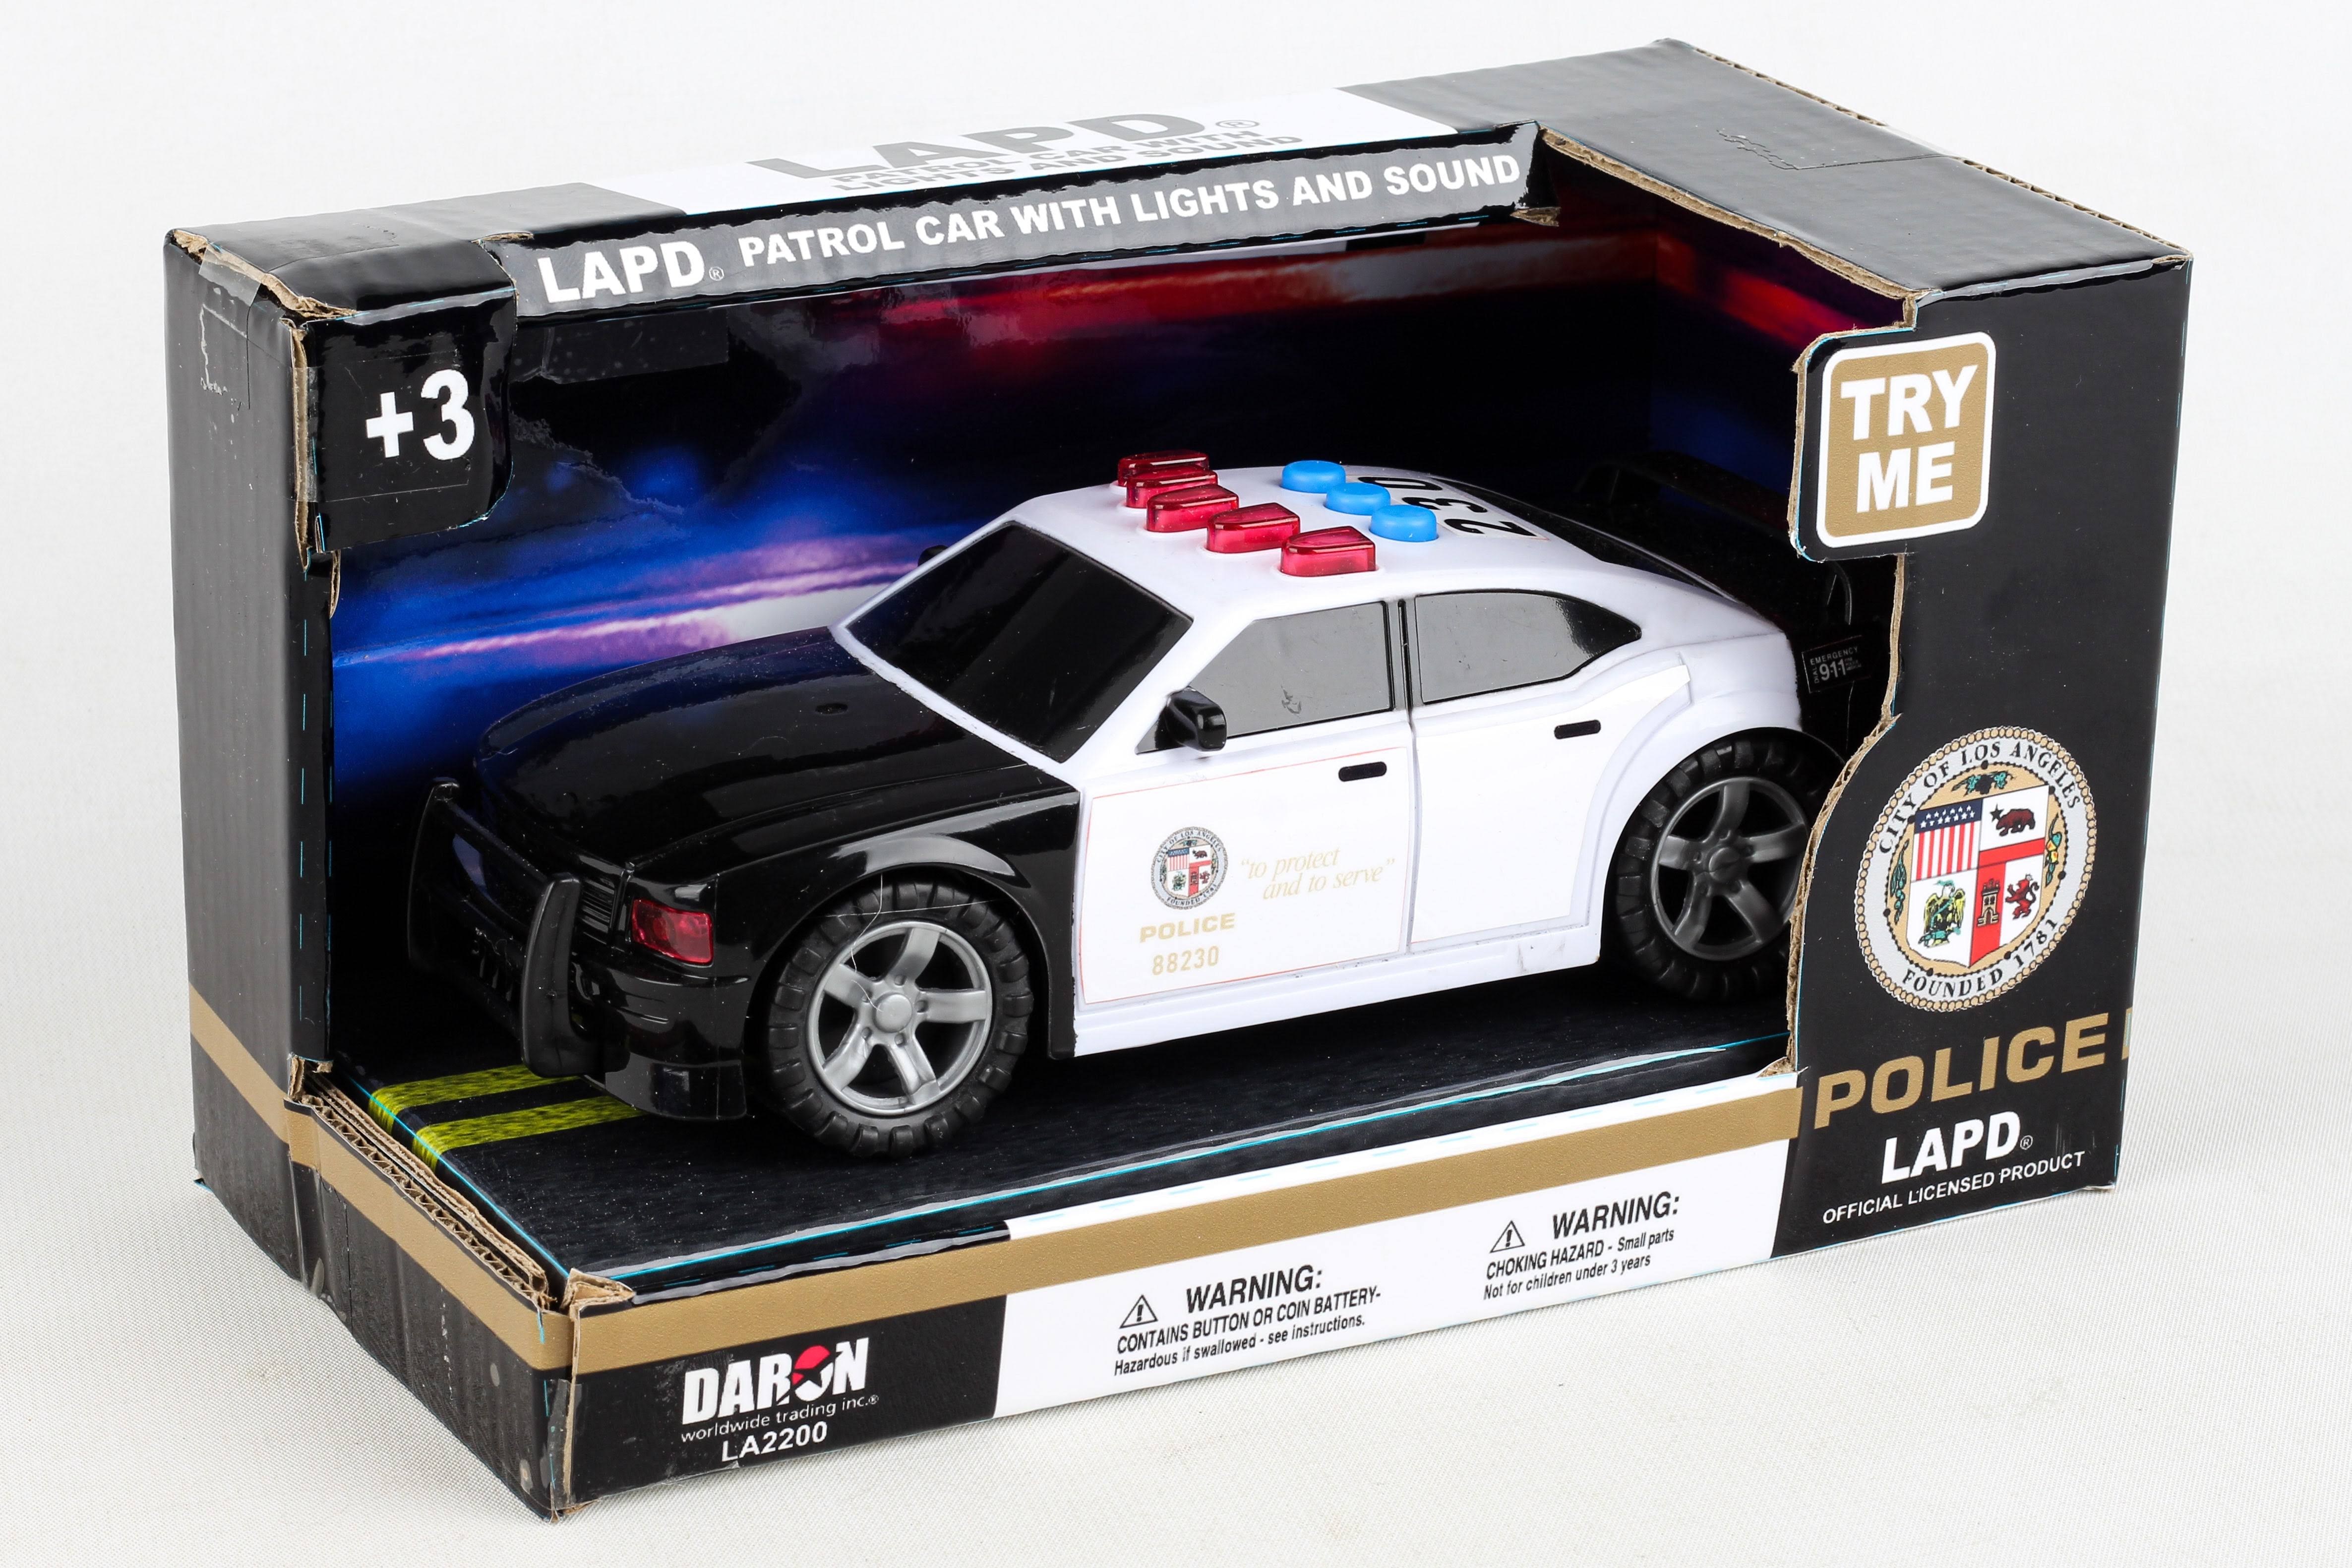 Daron LA2200 LAPD Police Car with Lights & Sound Toy